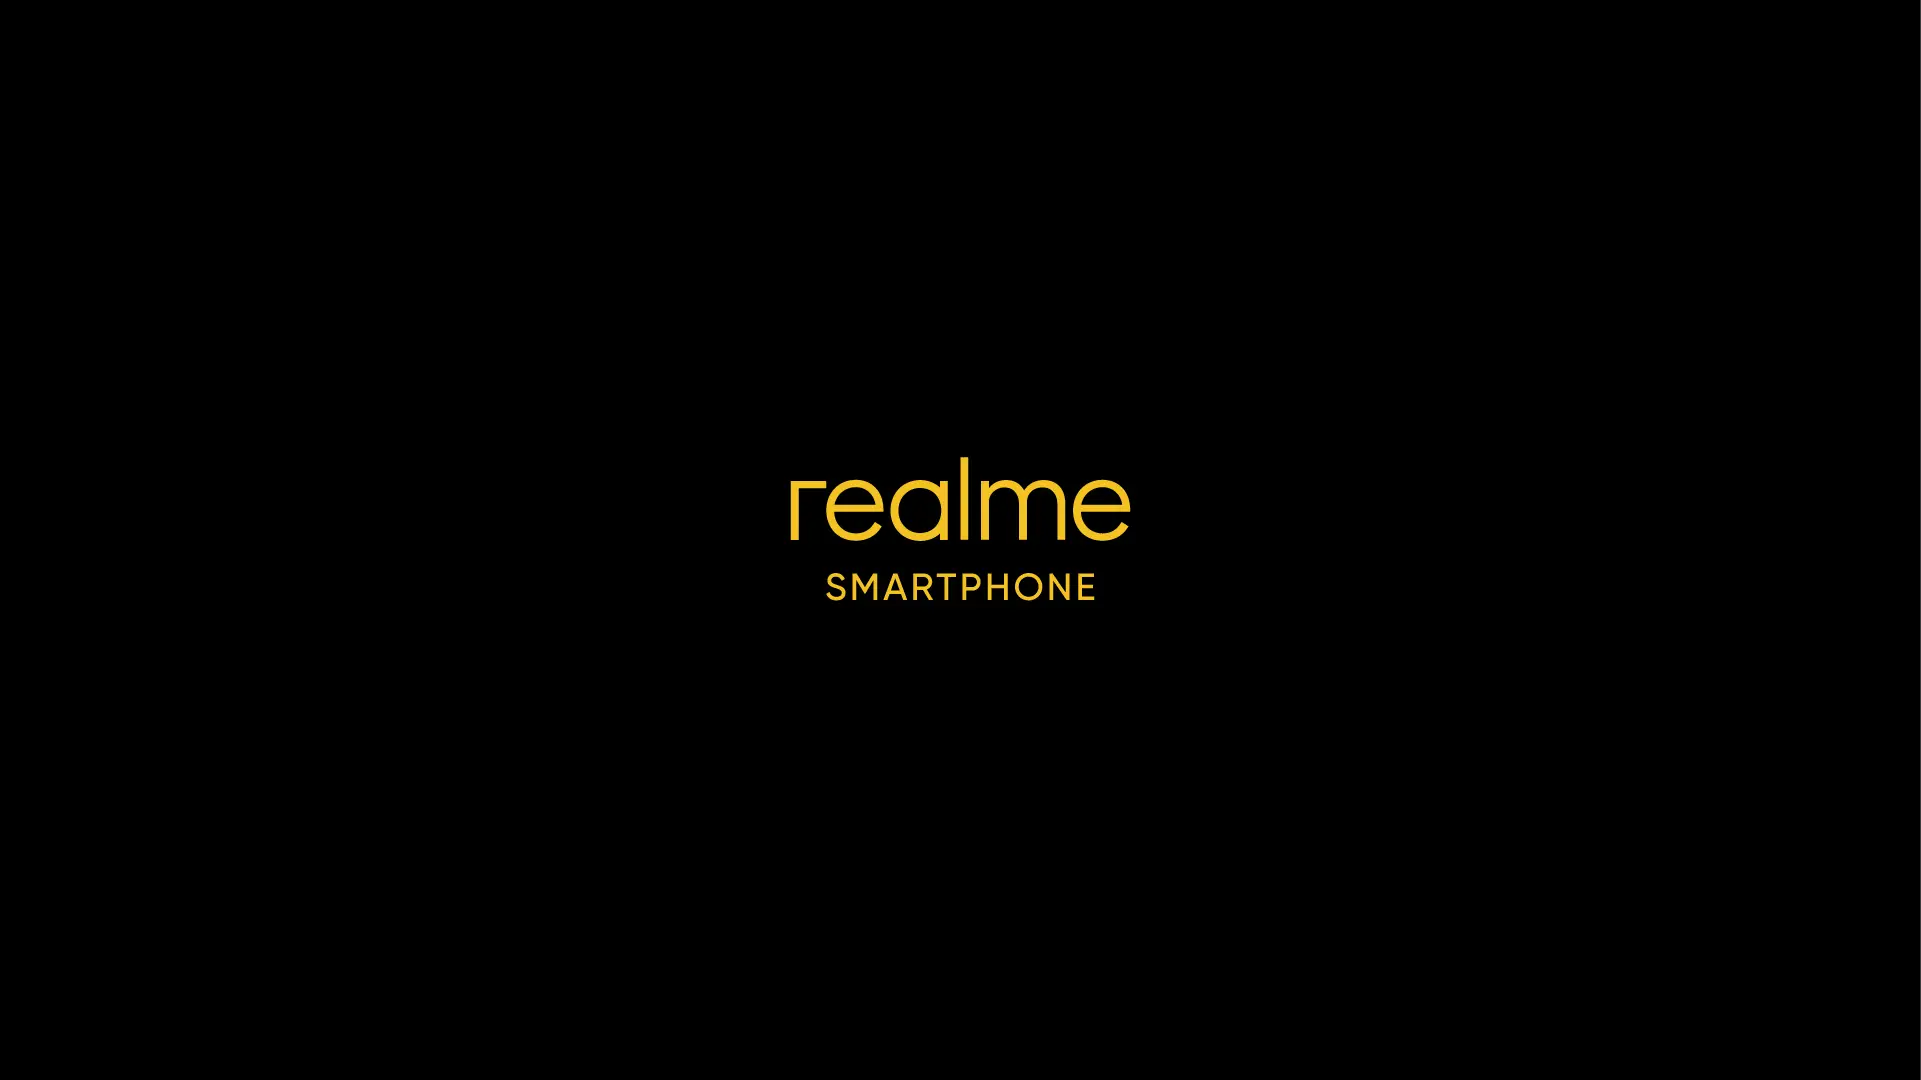 Dimensity 800U, high capacity battery and 5G - Realme V21 specifications revealed